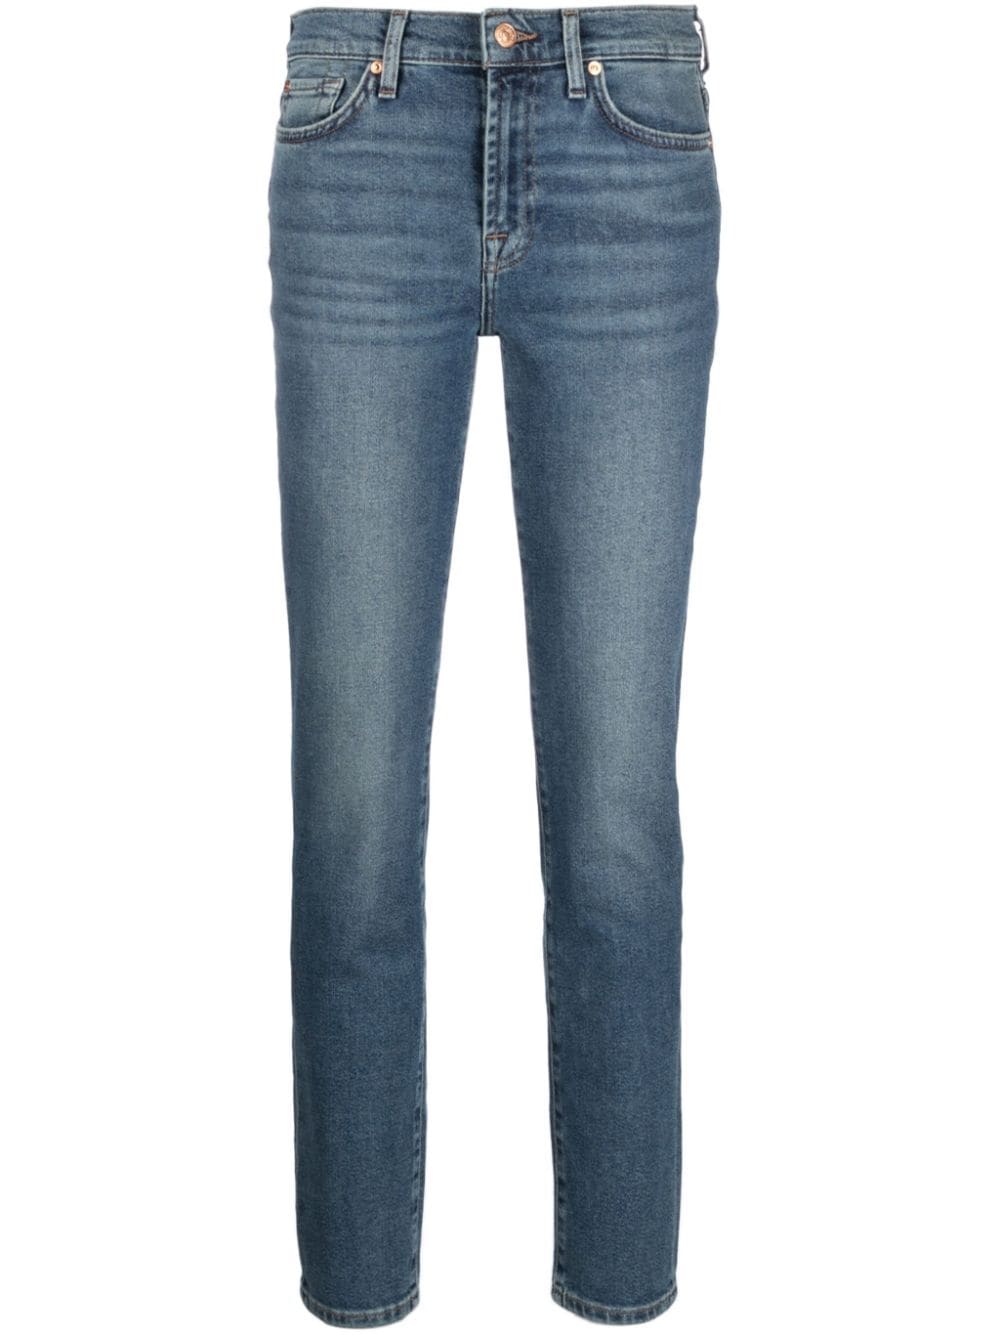 7 For All Mankind Roxanne mid-rise slim-cut jeans - Blue von 7 For All Mankind